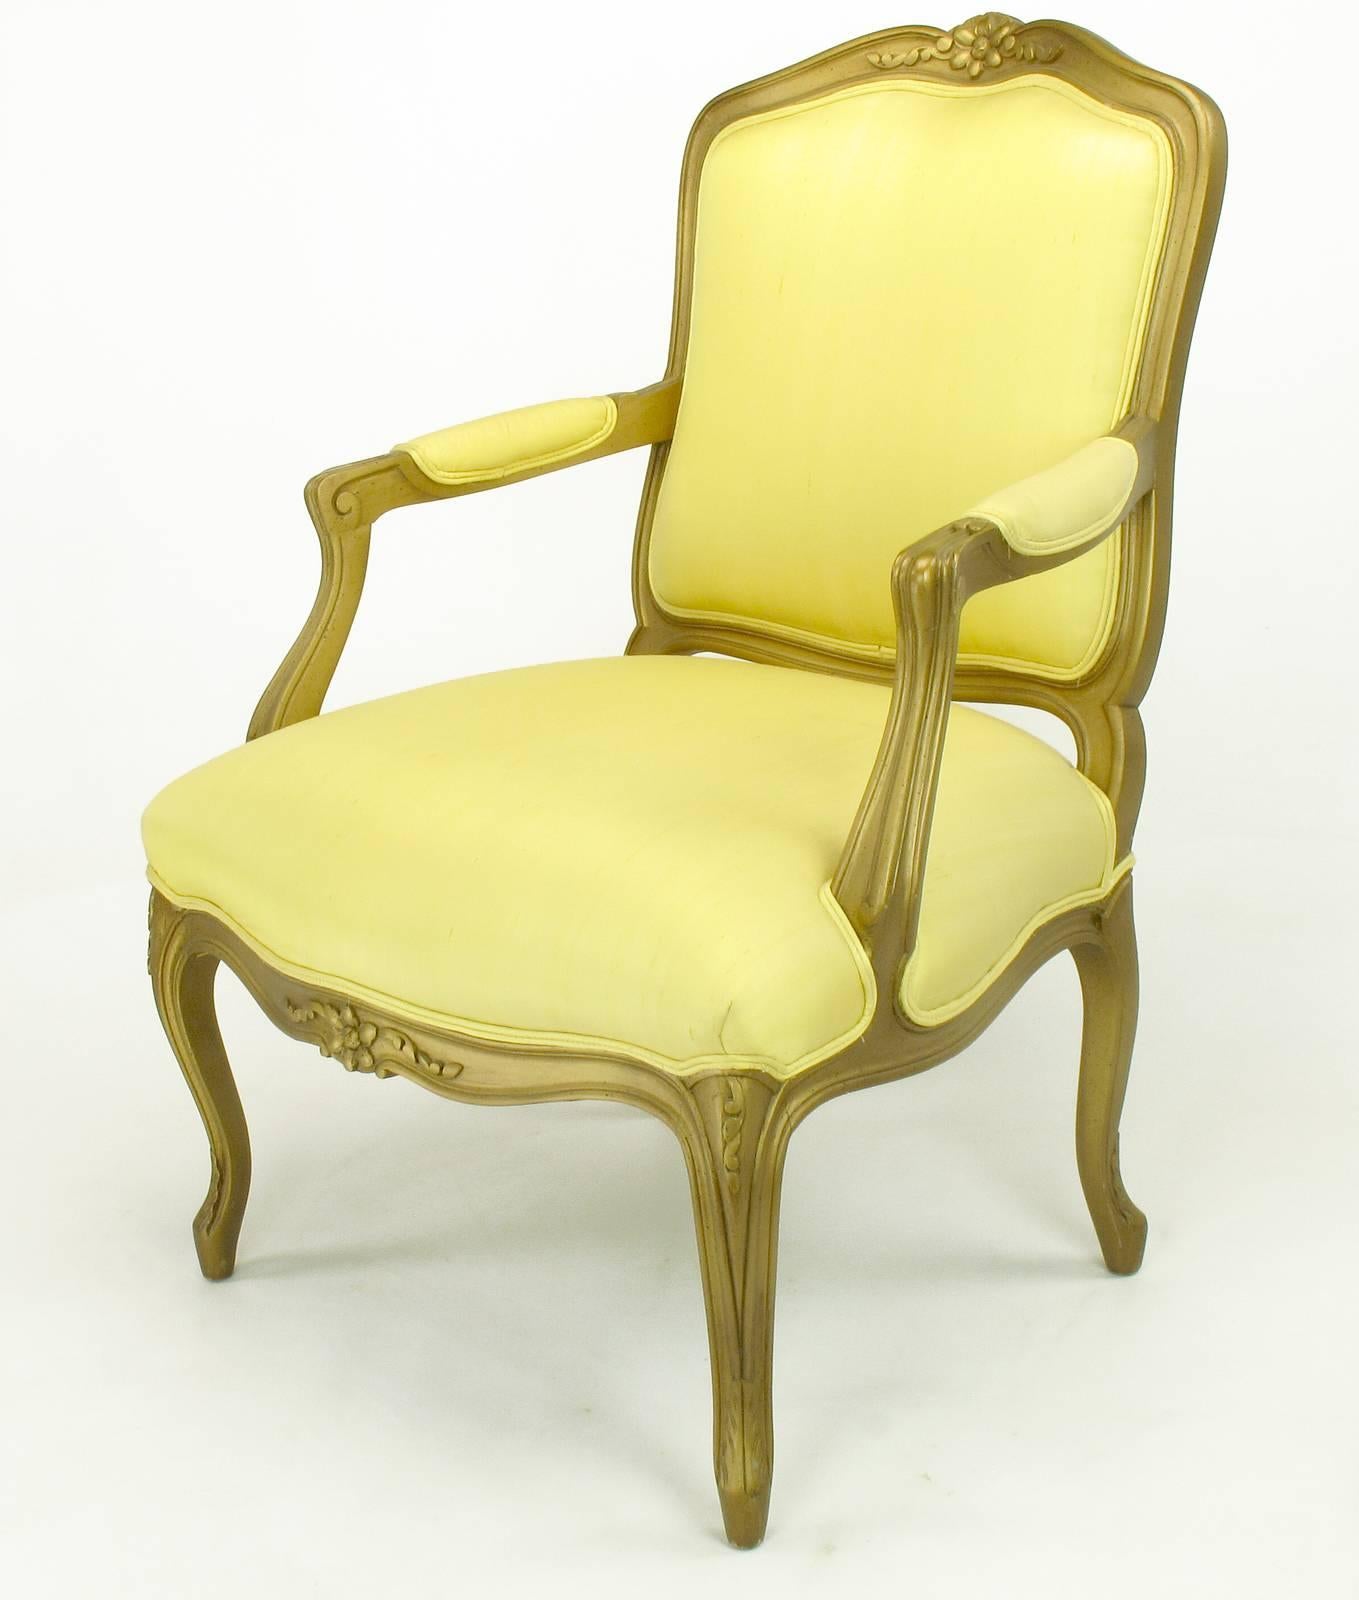 1940s giltwood Louis XV style armchair with saffron silk upholstery. Carved wood frame has been restored and gilt with black glaze. Arm height is 24.5